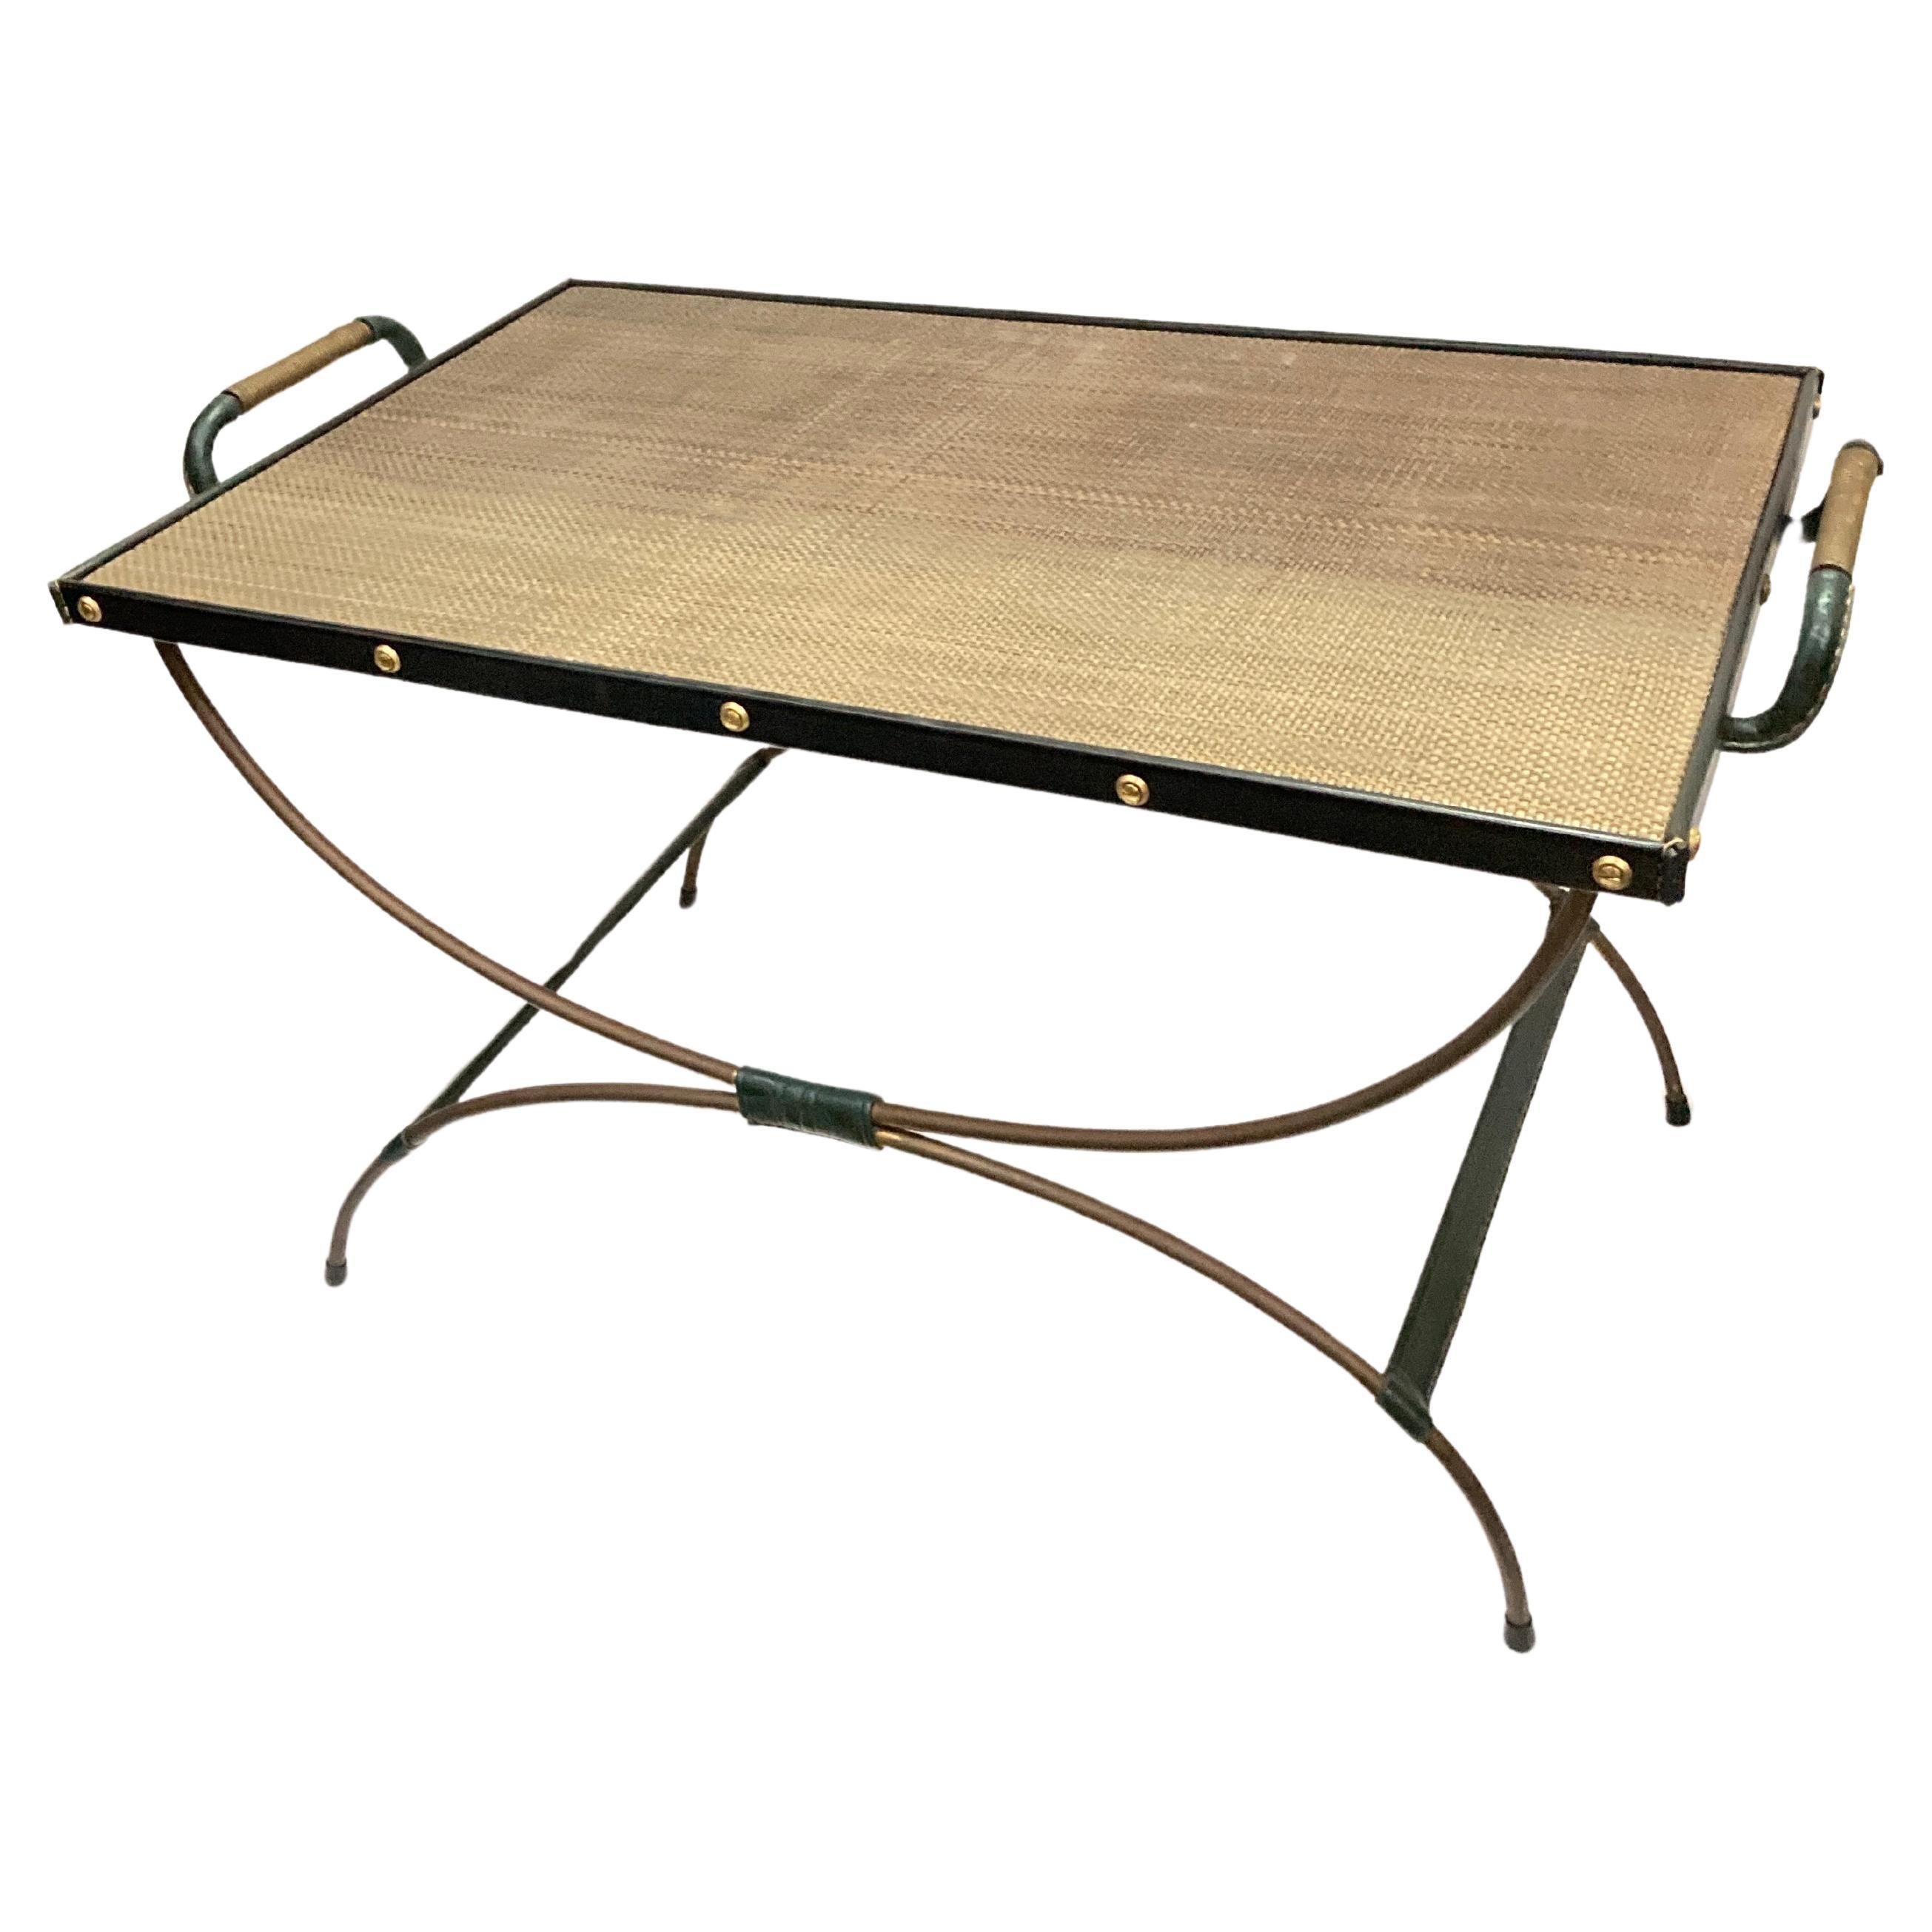 1950's Stitched leather an brass cocktail table By Jacques Adnet